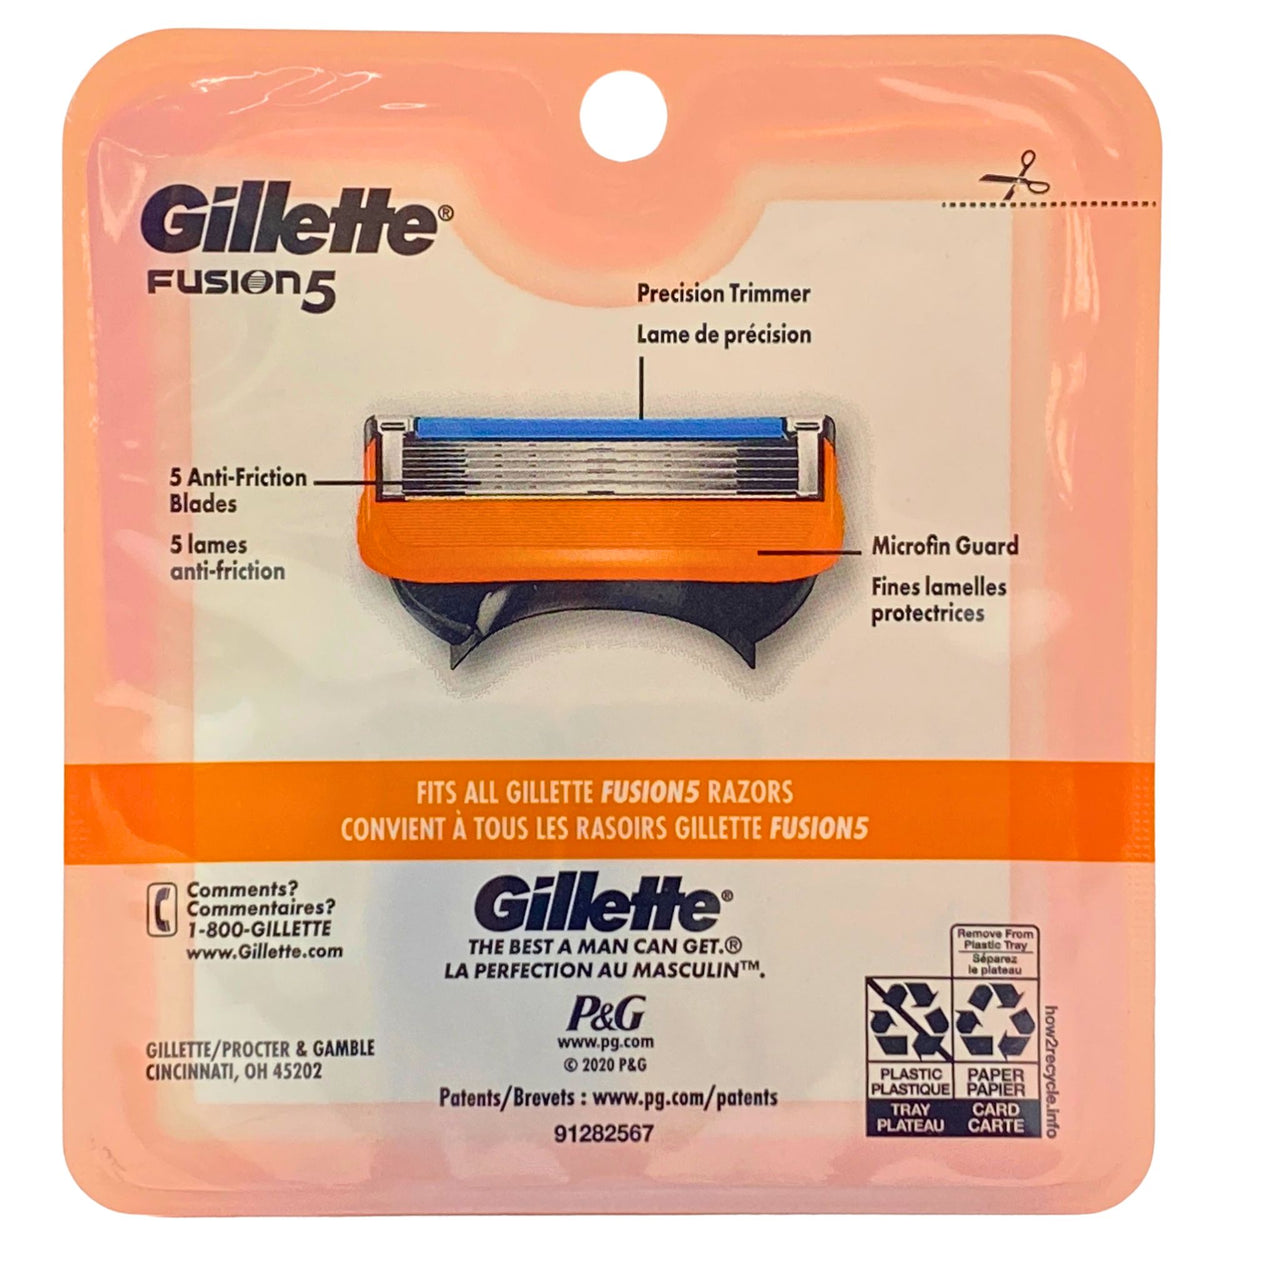 Gillette 2-Count Fusion5 Razor Blades Refill Pack, Trial Pack Anti-Friction Blades